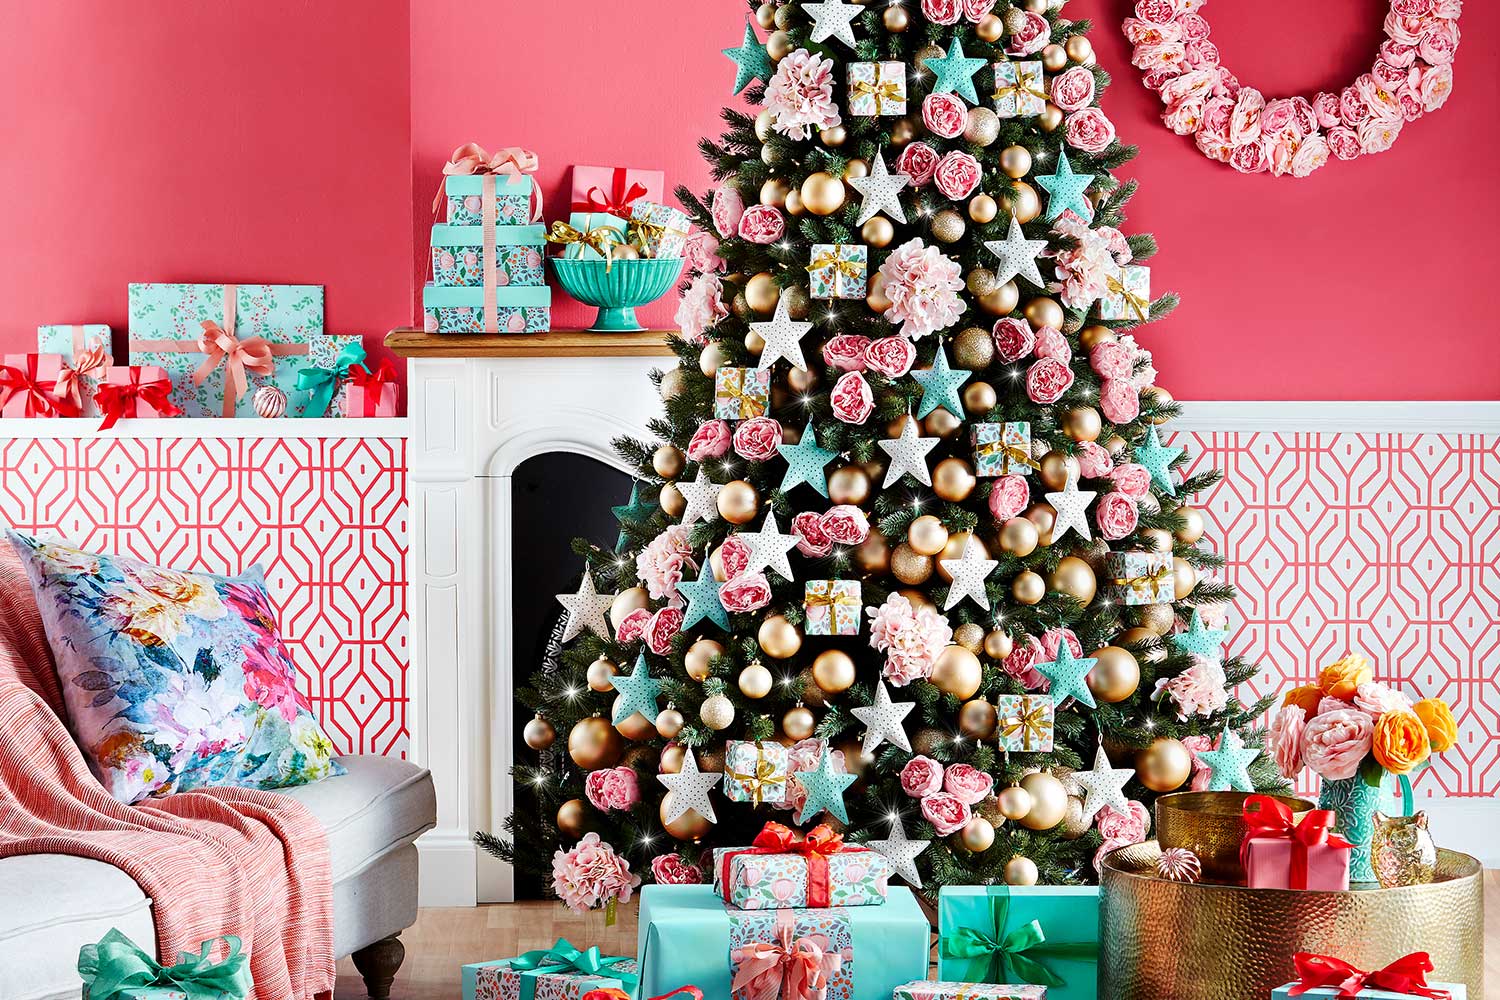 A Feathery Pink Christmas Tree Blue Ornaments